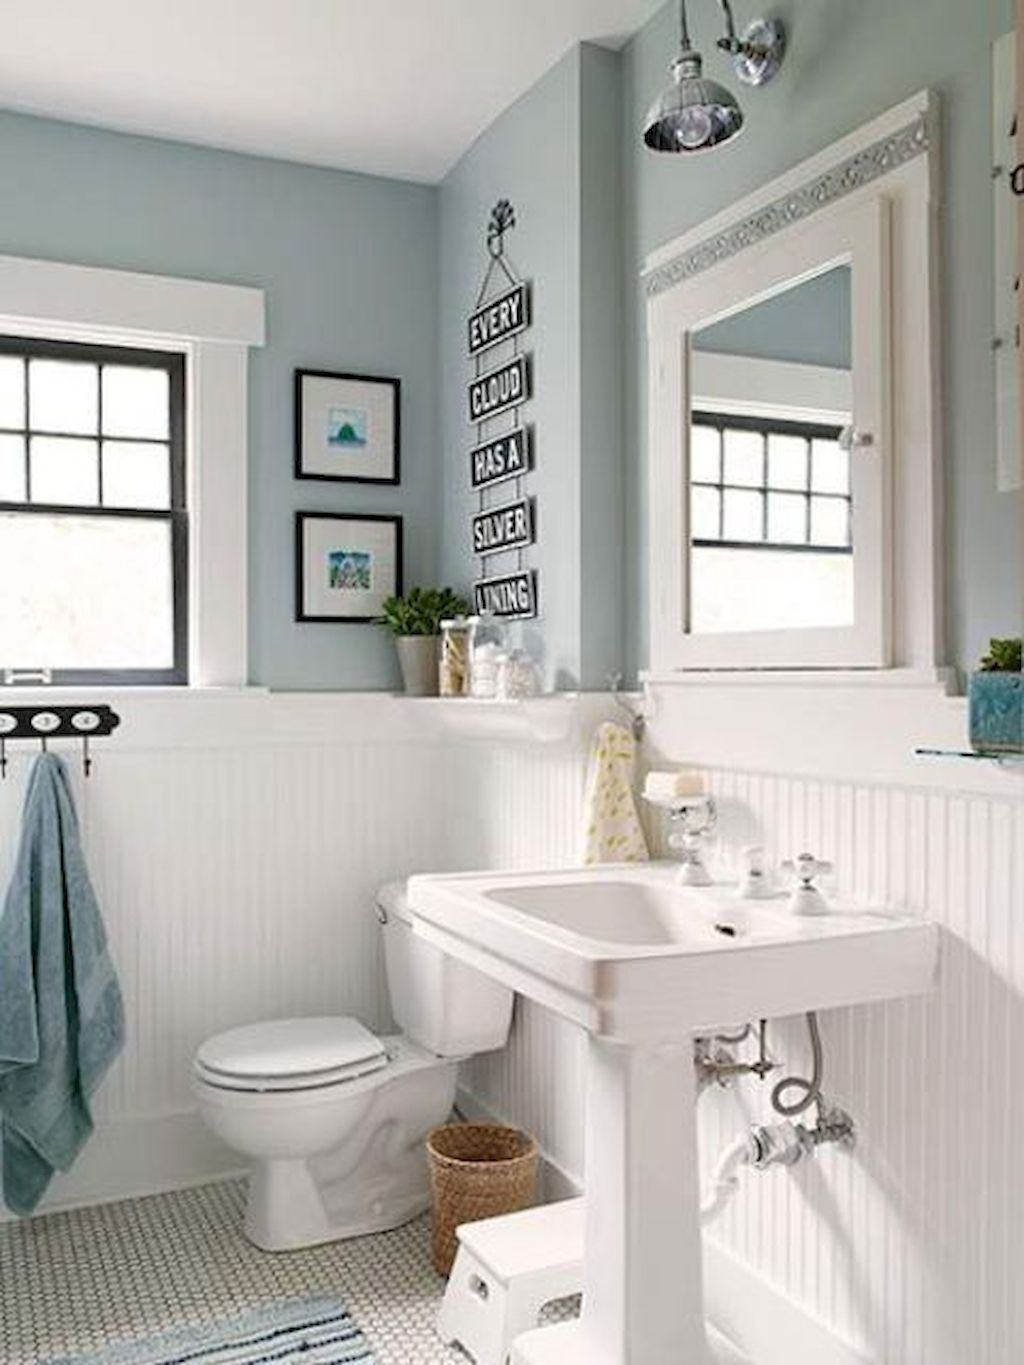 Light Blue Bathroom Accessories
 110 Absolutely Stunning Bathroom Decor Ideas And Remodel